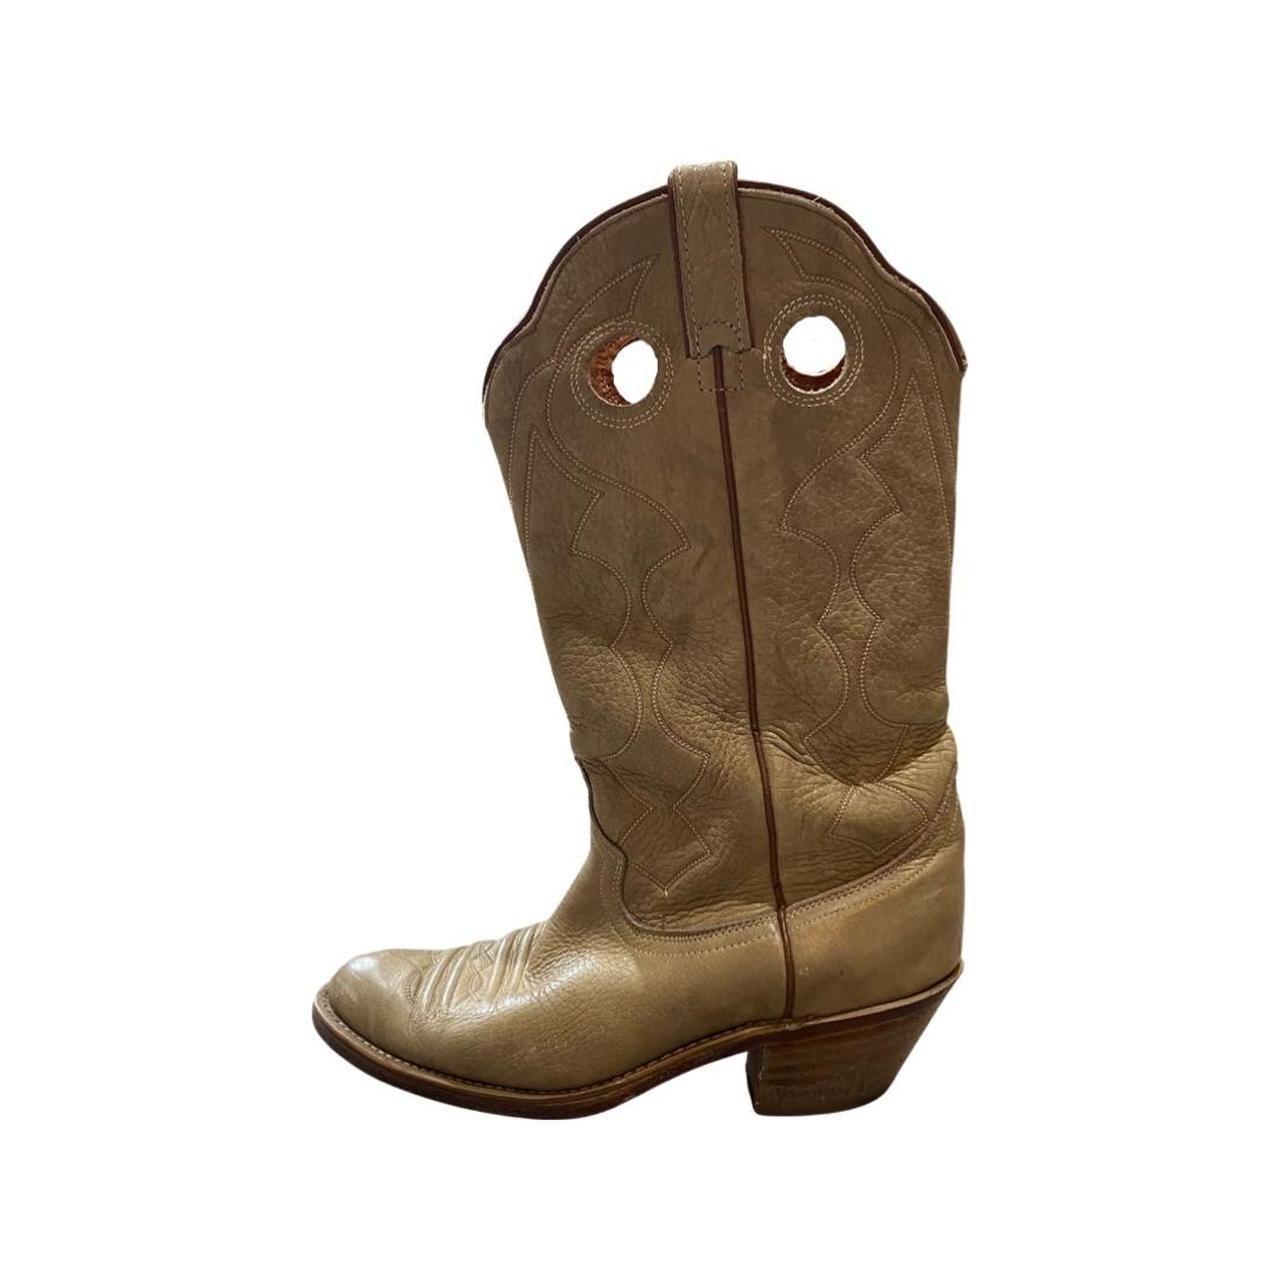 Product Image 2 - VINTAGE CREAM COWBOY BOOTS

-80s
-MADE IN